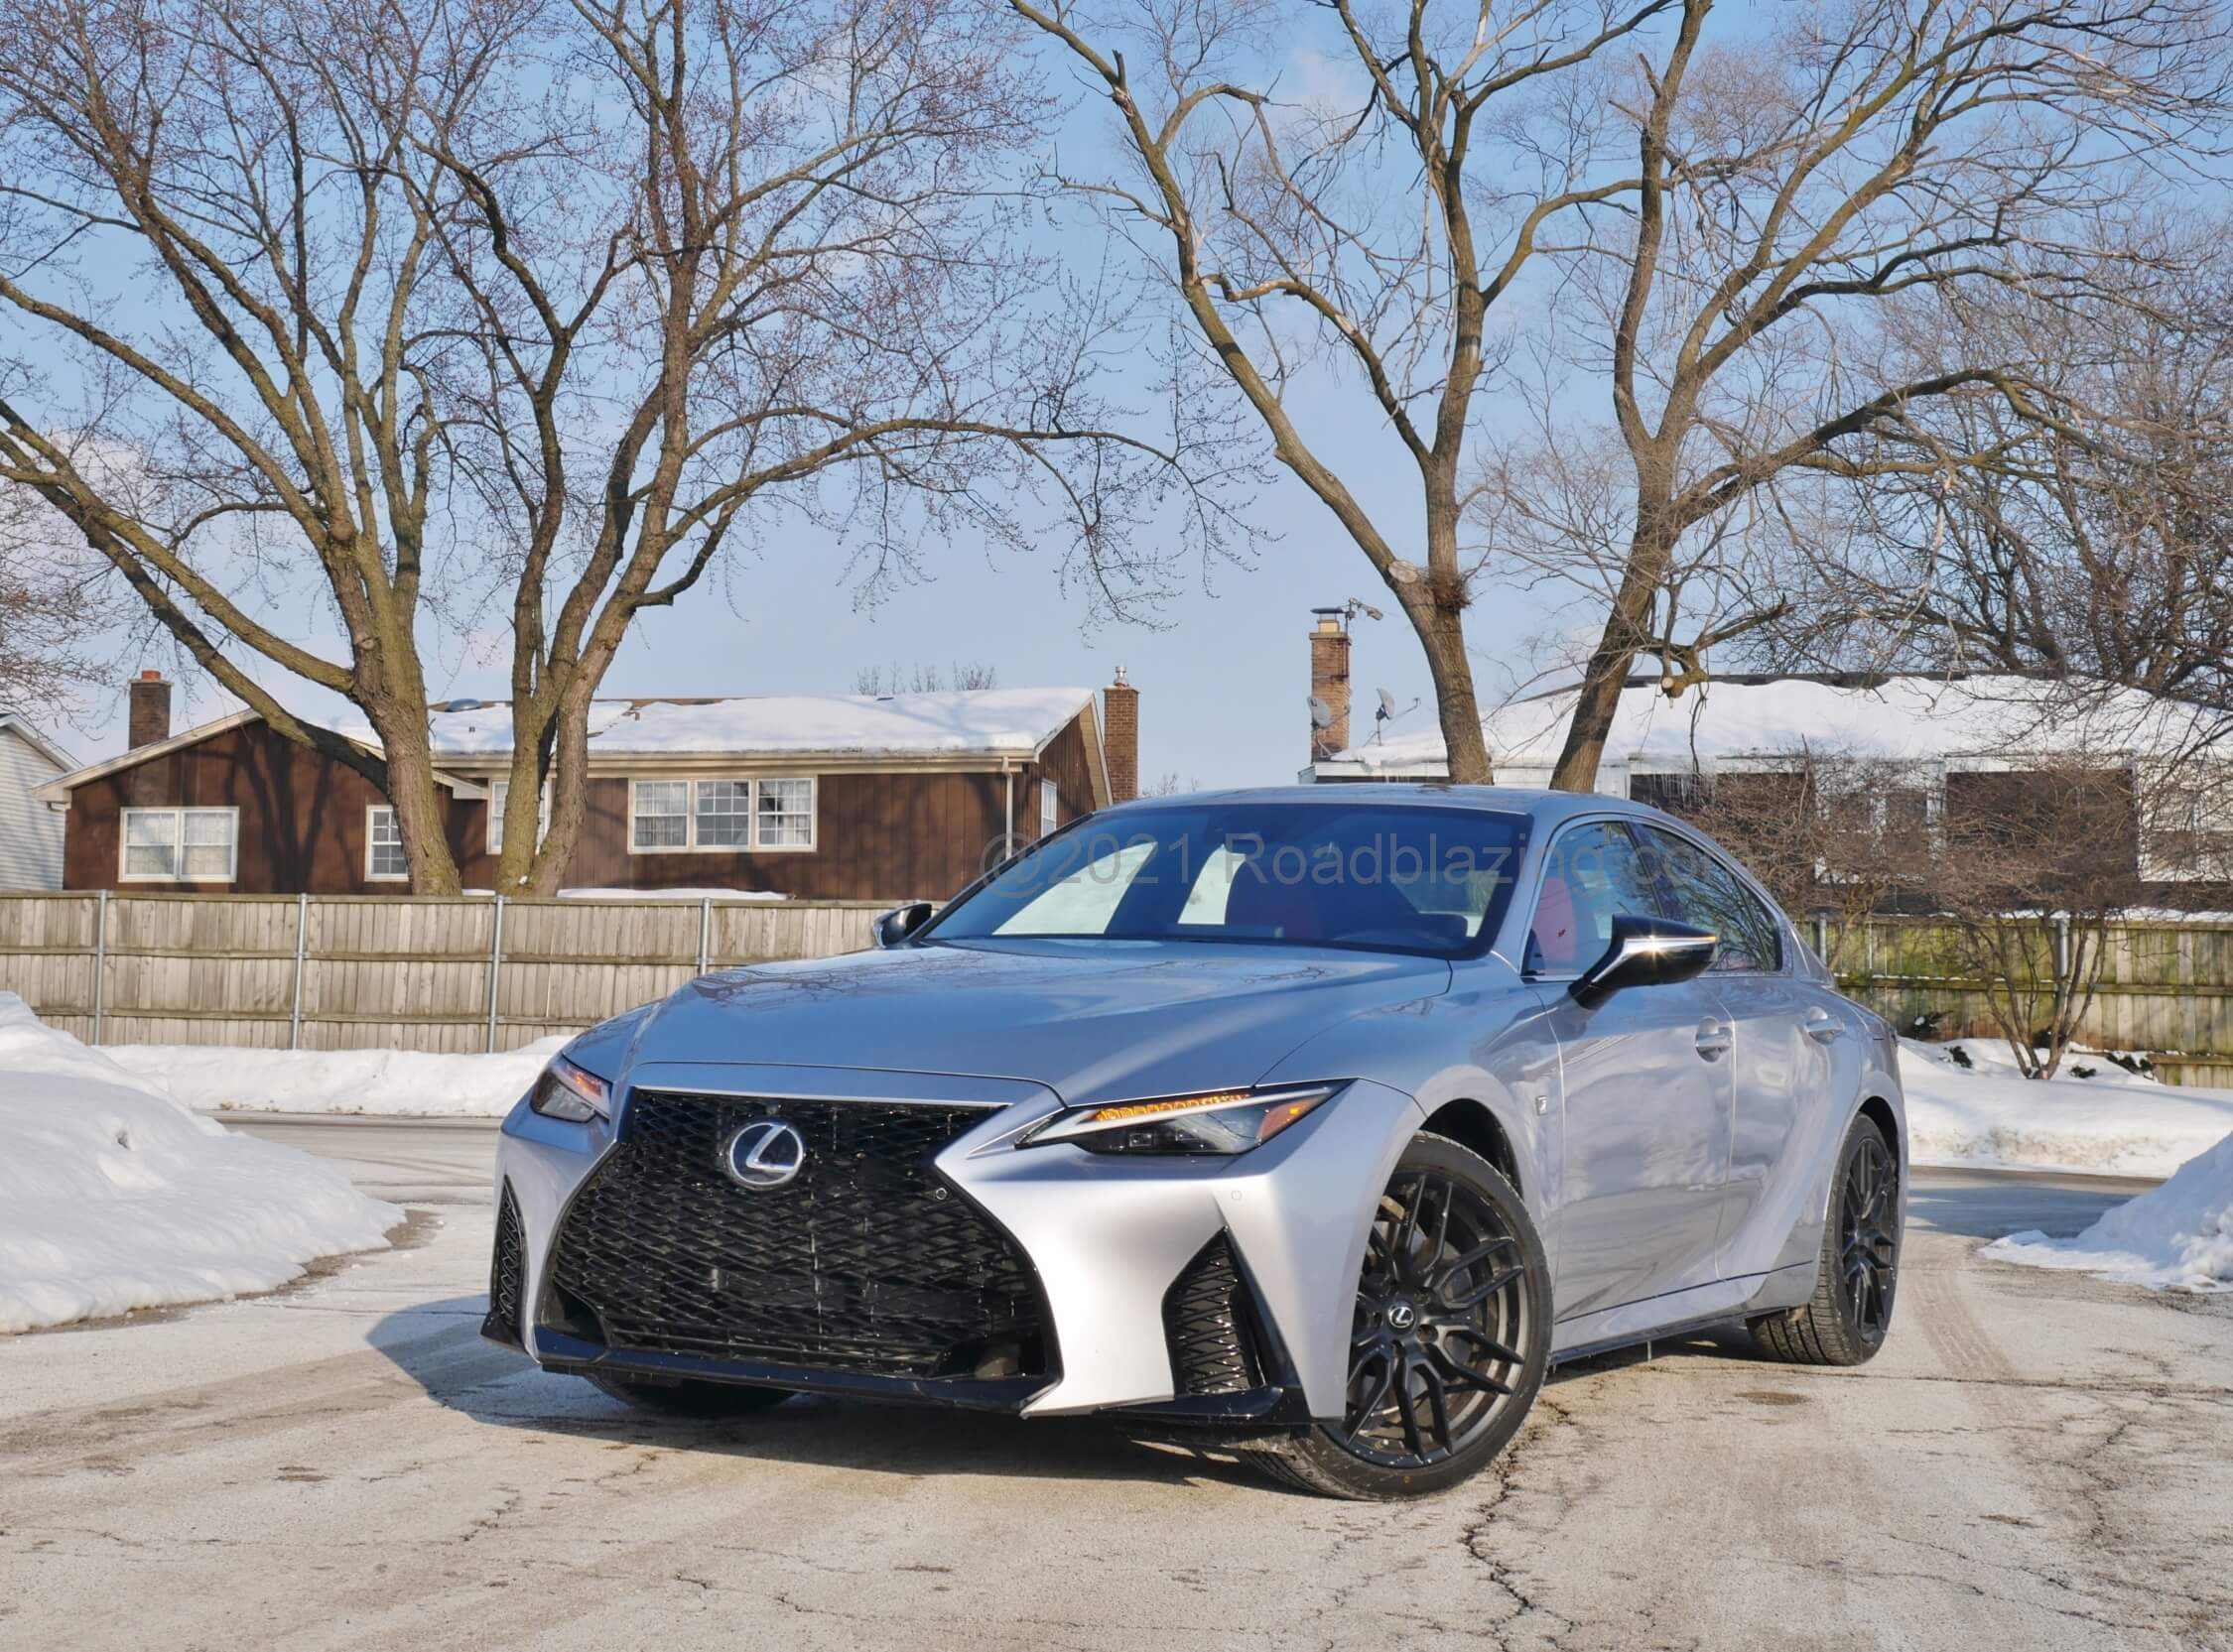 2021 Lexus IS 350 AWD: fully darkened assertive take on widened Lexus spindle grille, w. revised corner folded aero ducts